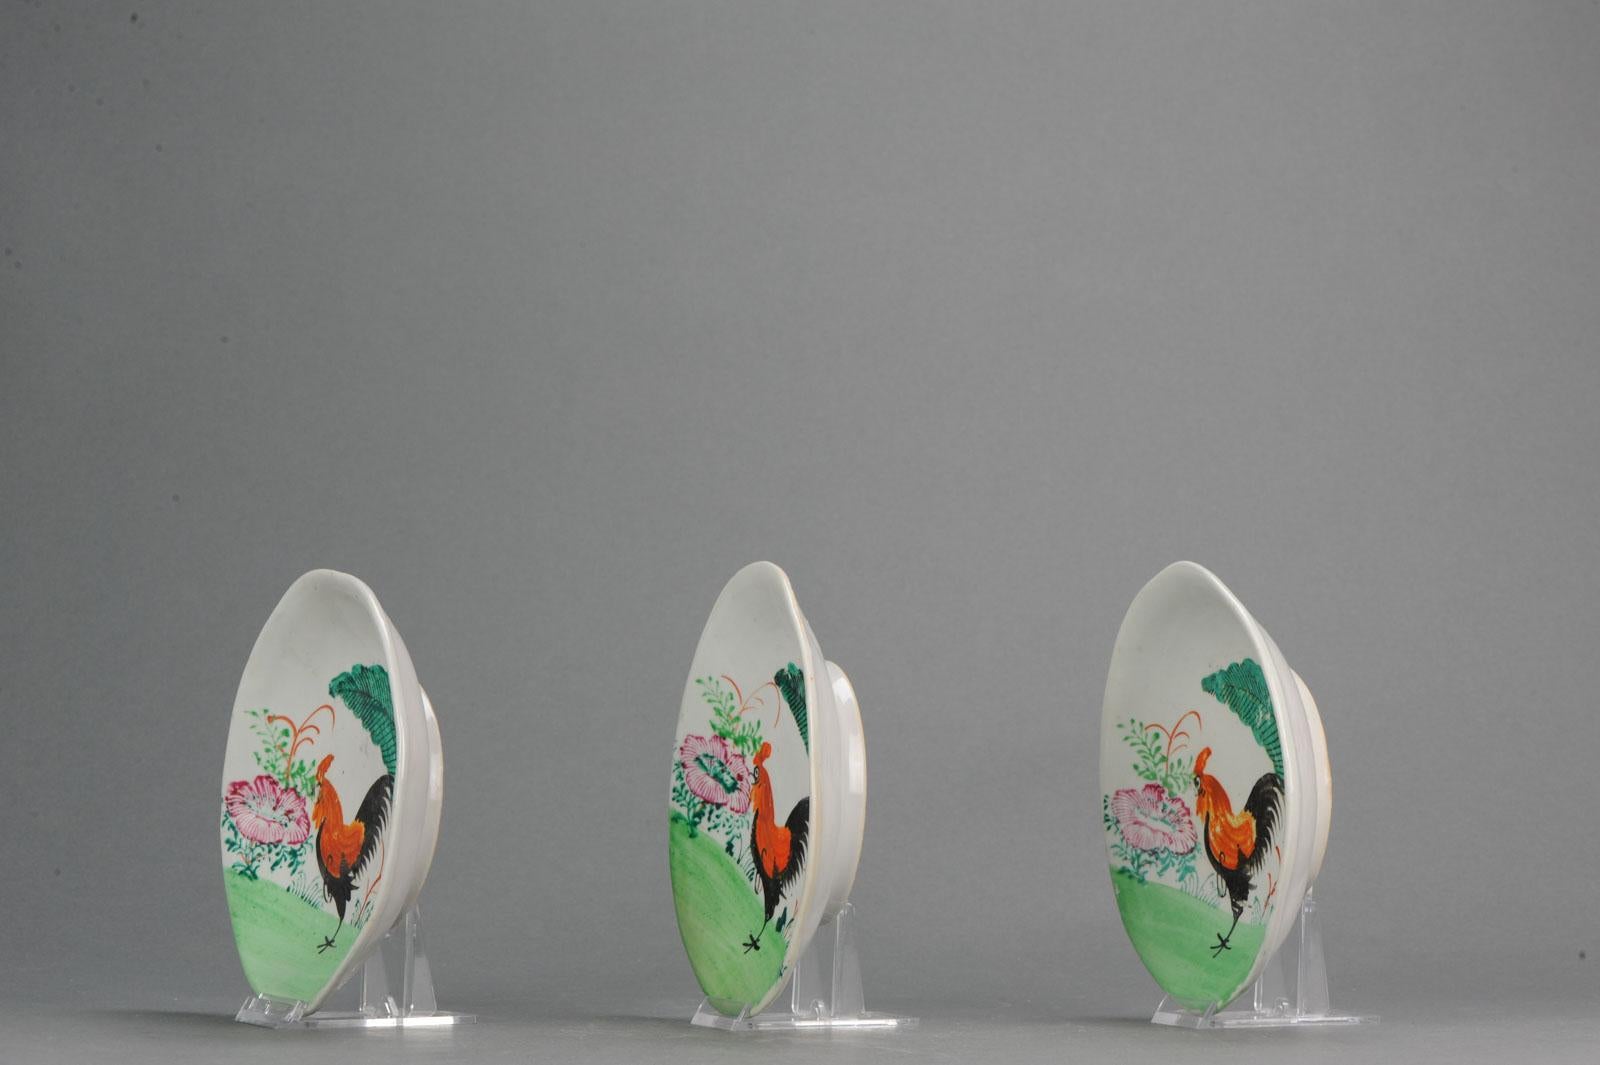 Lovely Chinese porcelain kitchen rooster serving dishs with Polychrome decoration and symbols.

Additional information:
Material: Porcelain 
Type: Bowls
Region of Origin: China
Country of Manufacturing: China
Period: 20th century PRoC (1949 -